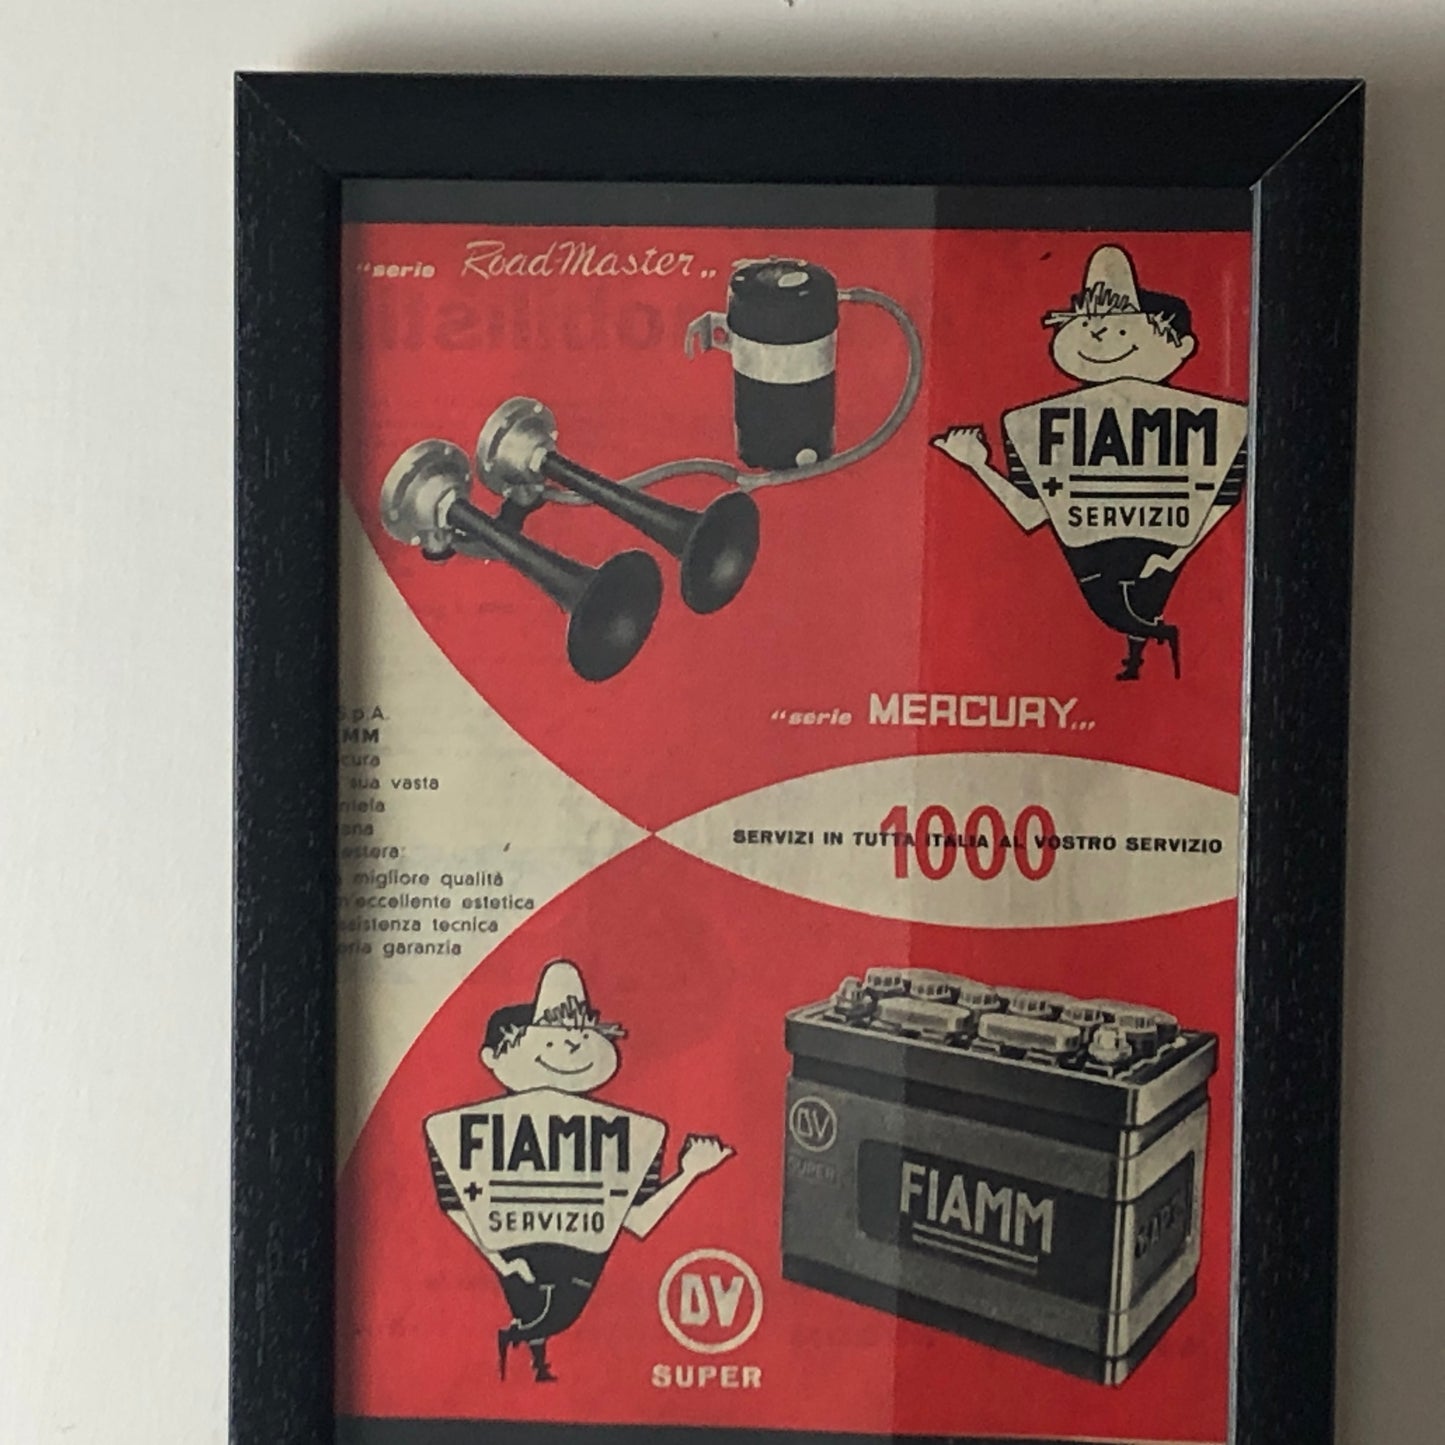 FIAMM, Advertising Year 1960 FIAMM Road Master Electropneumatic Horns and Mercury Batteries